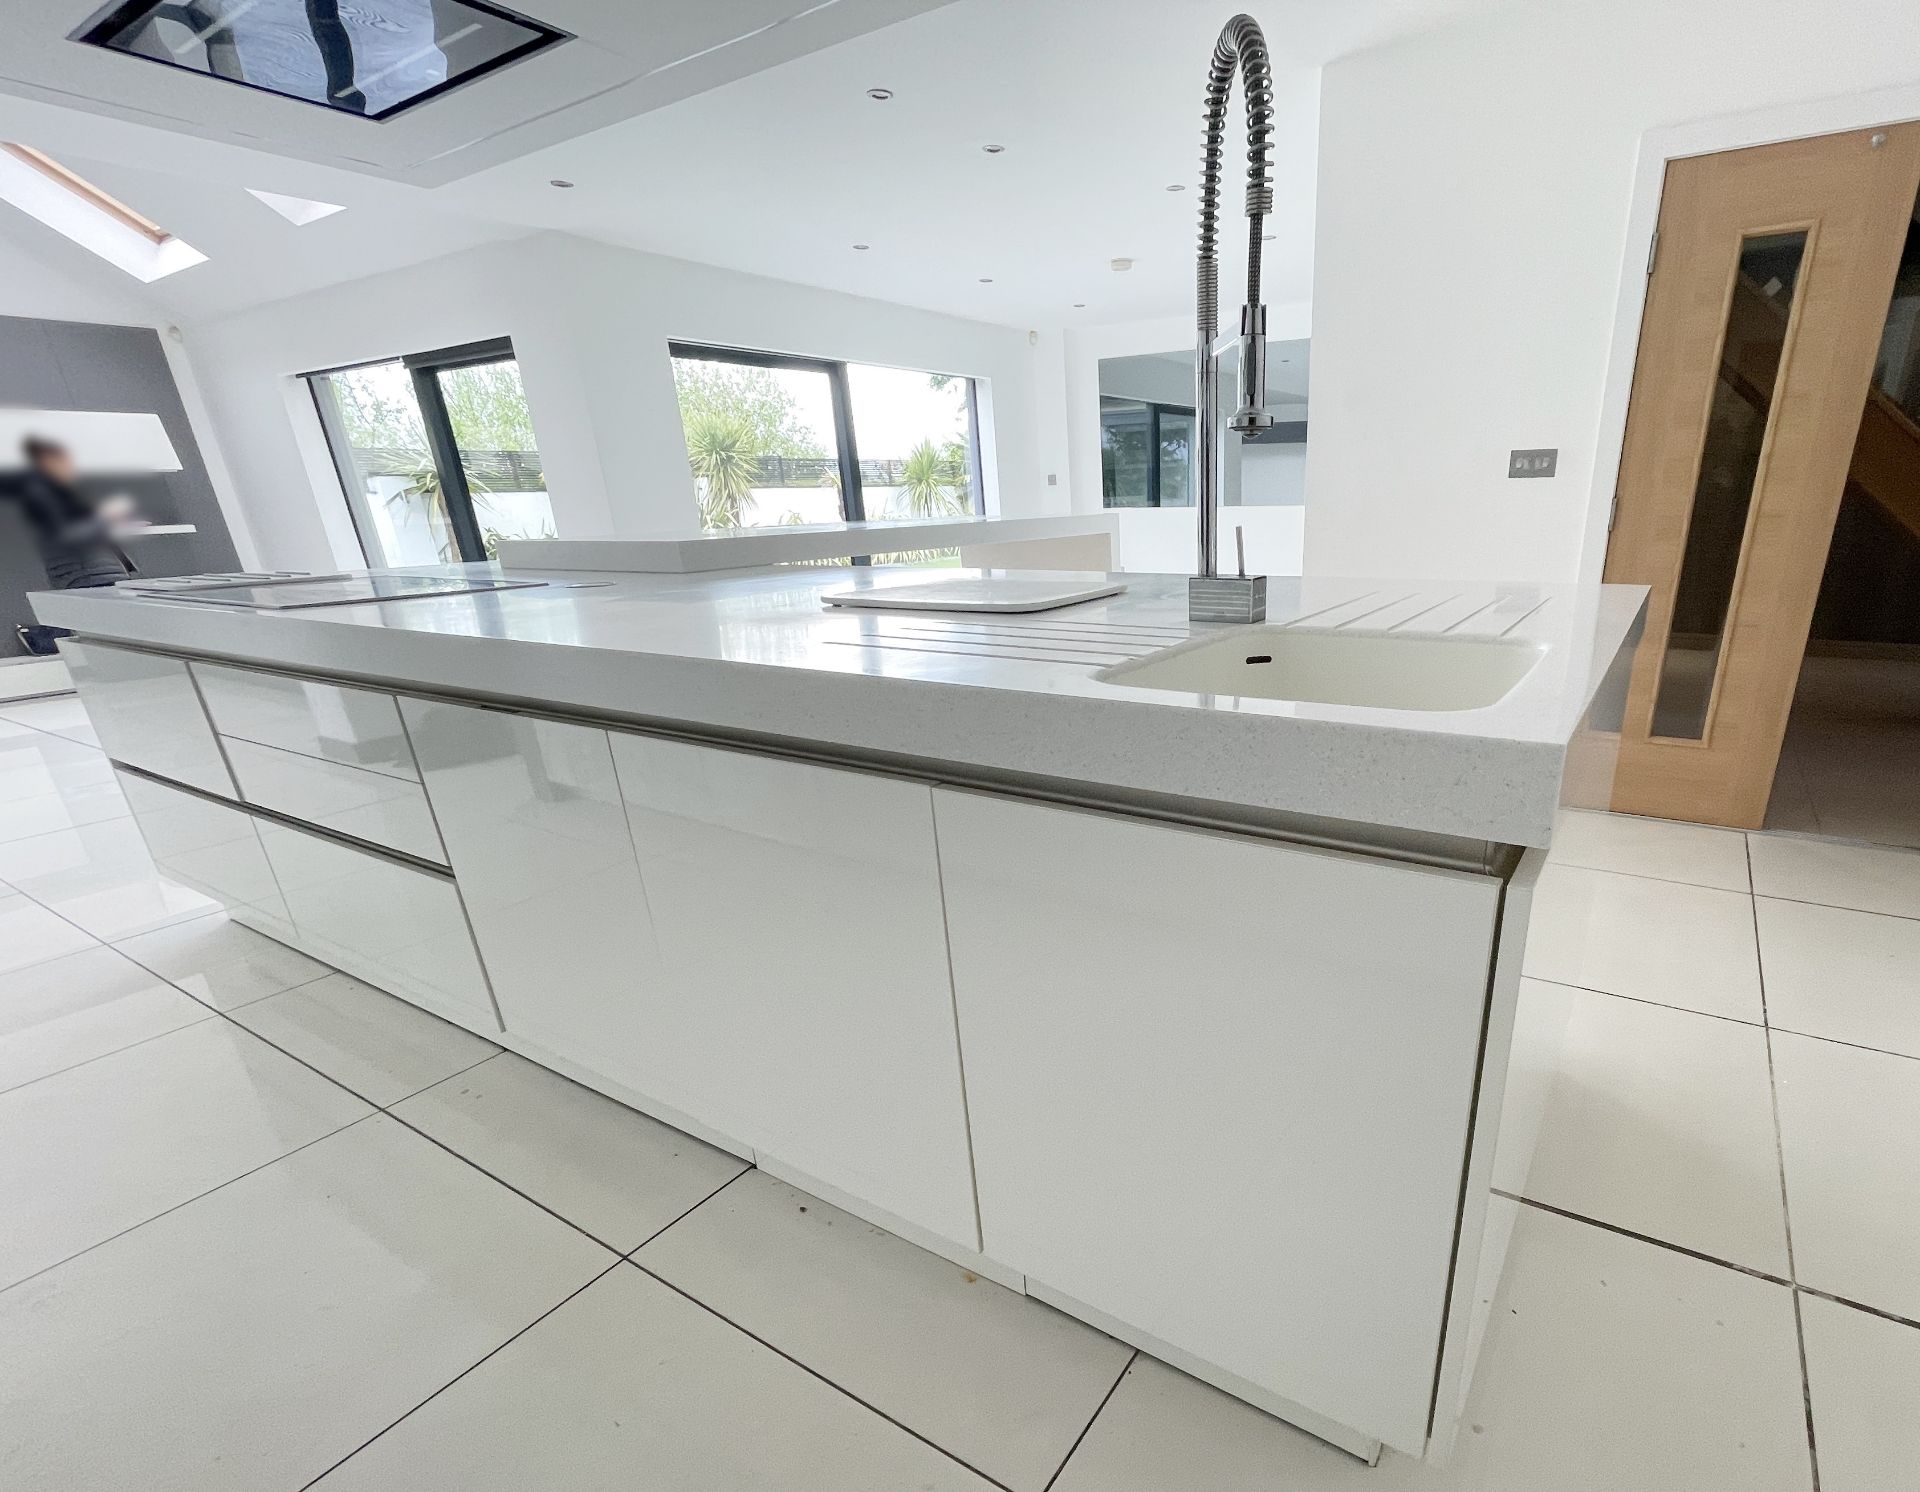 1 x SieMatic Contemporary Fitted Kitchen With Branded Appliances, Central Island + Corian Worktops - Image 23 of 100